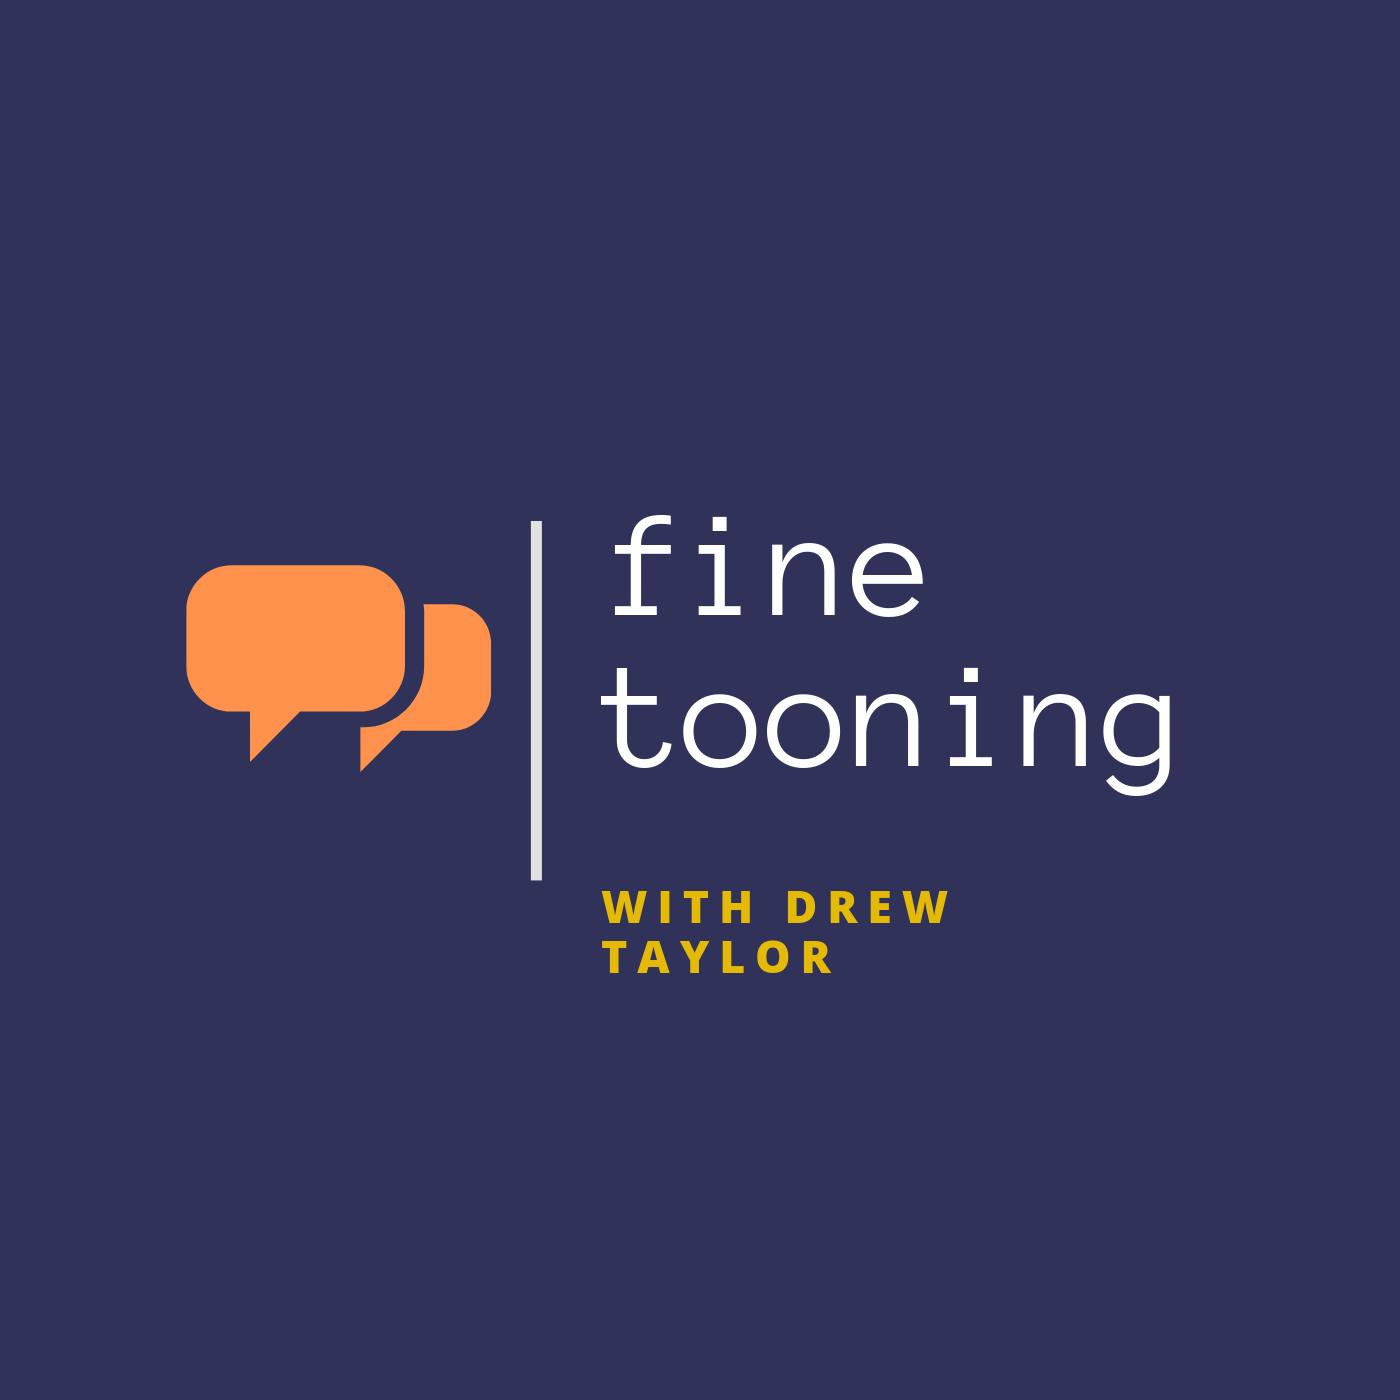 Fine Tooning with Drew Taylor Episode 69: Get ready for “Onward”